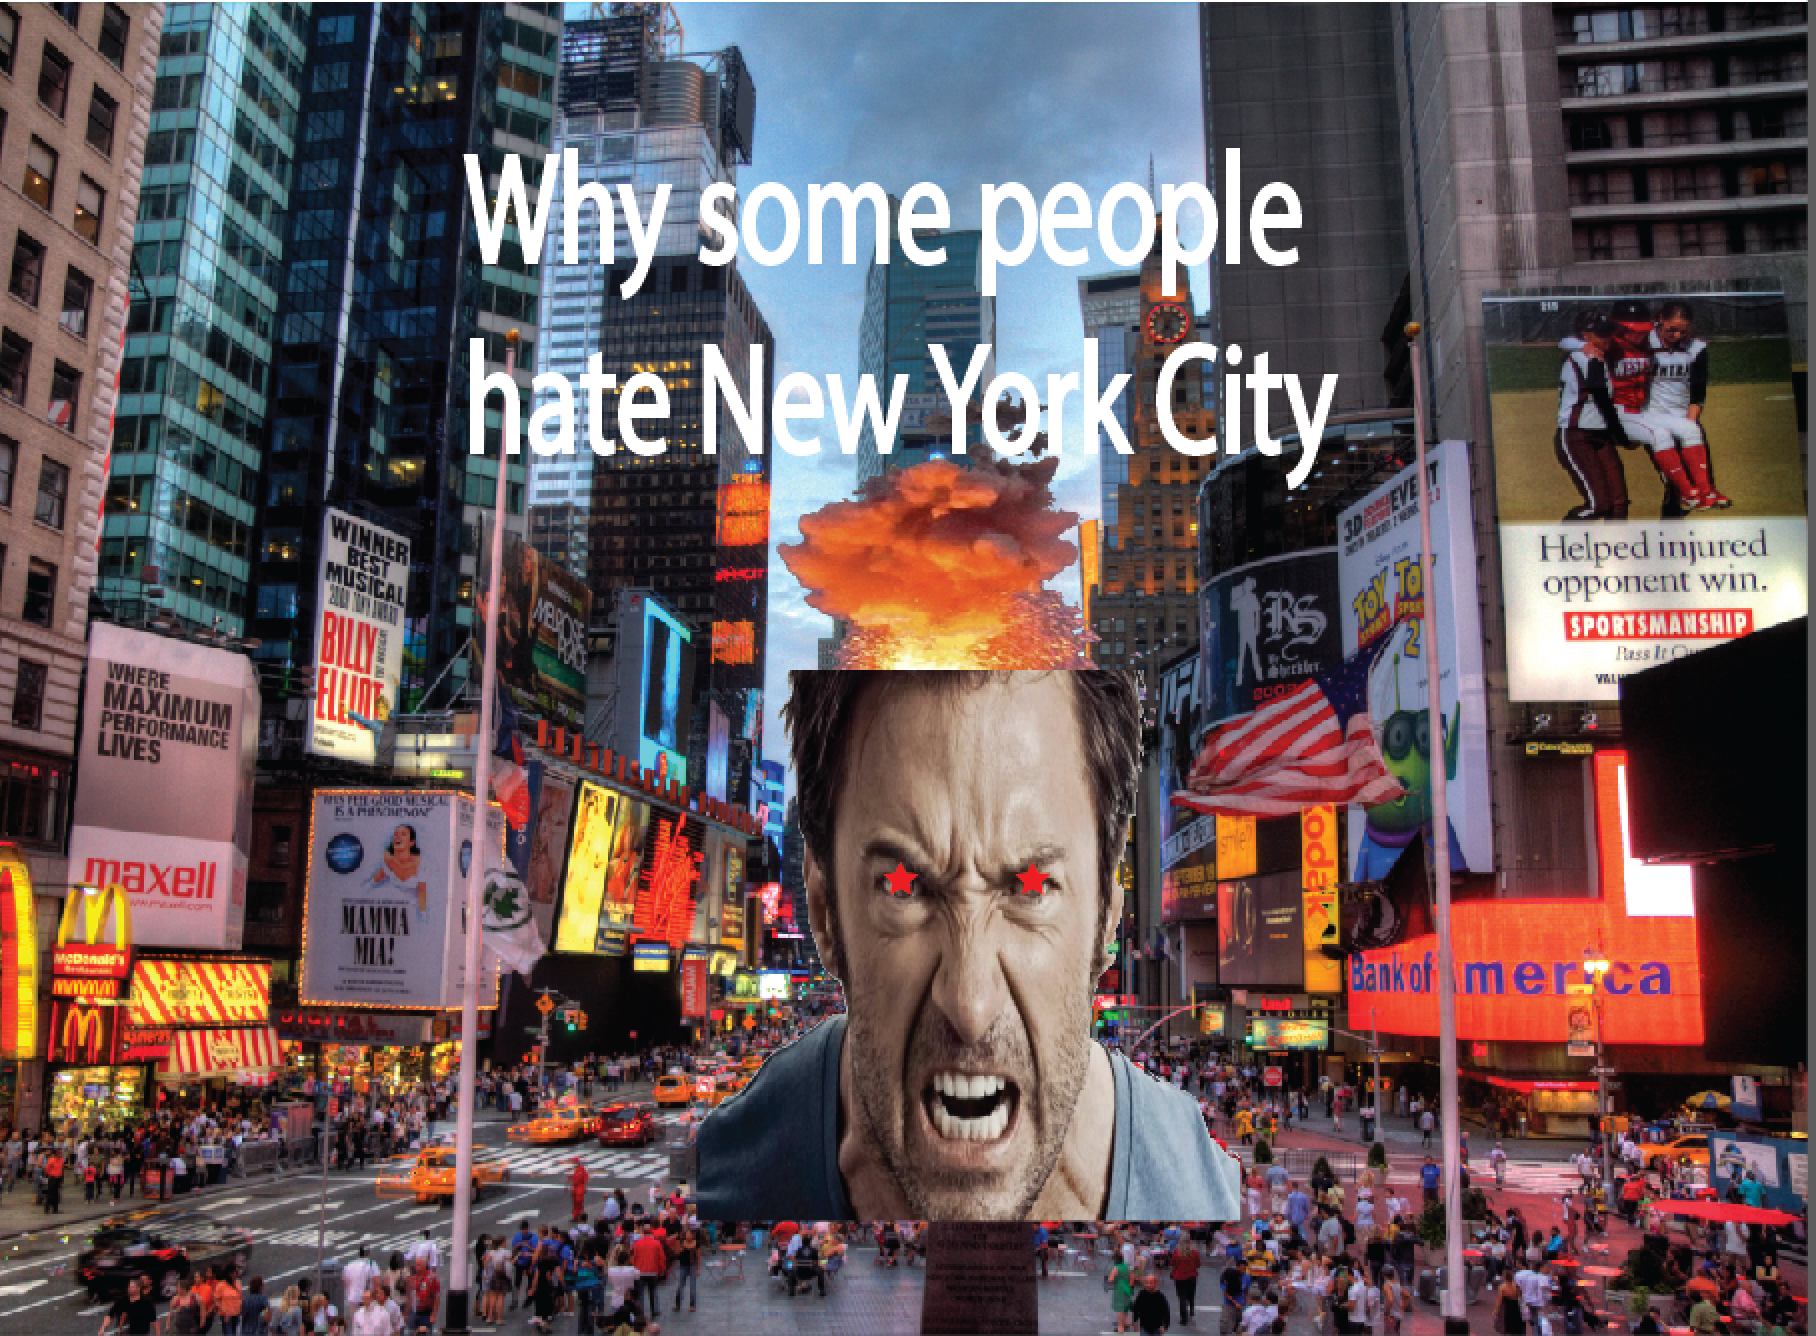 Why some people hate New York City?